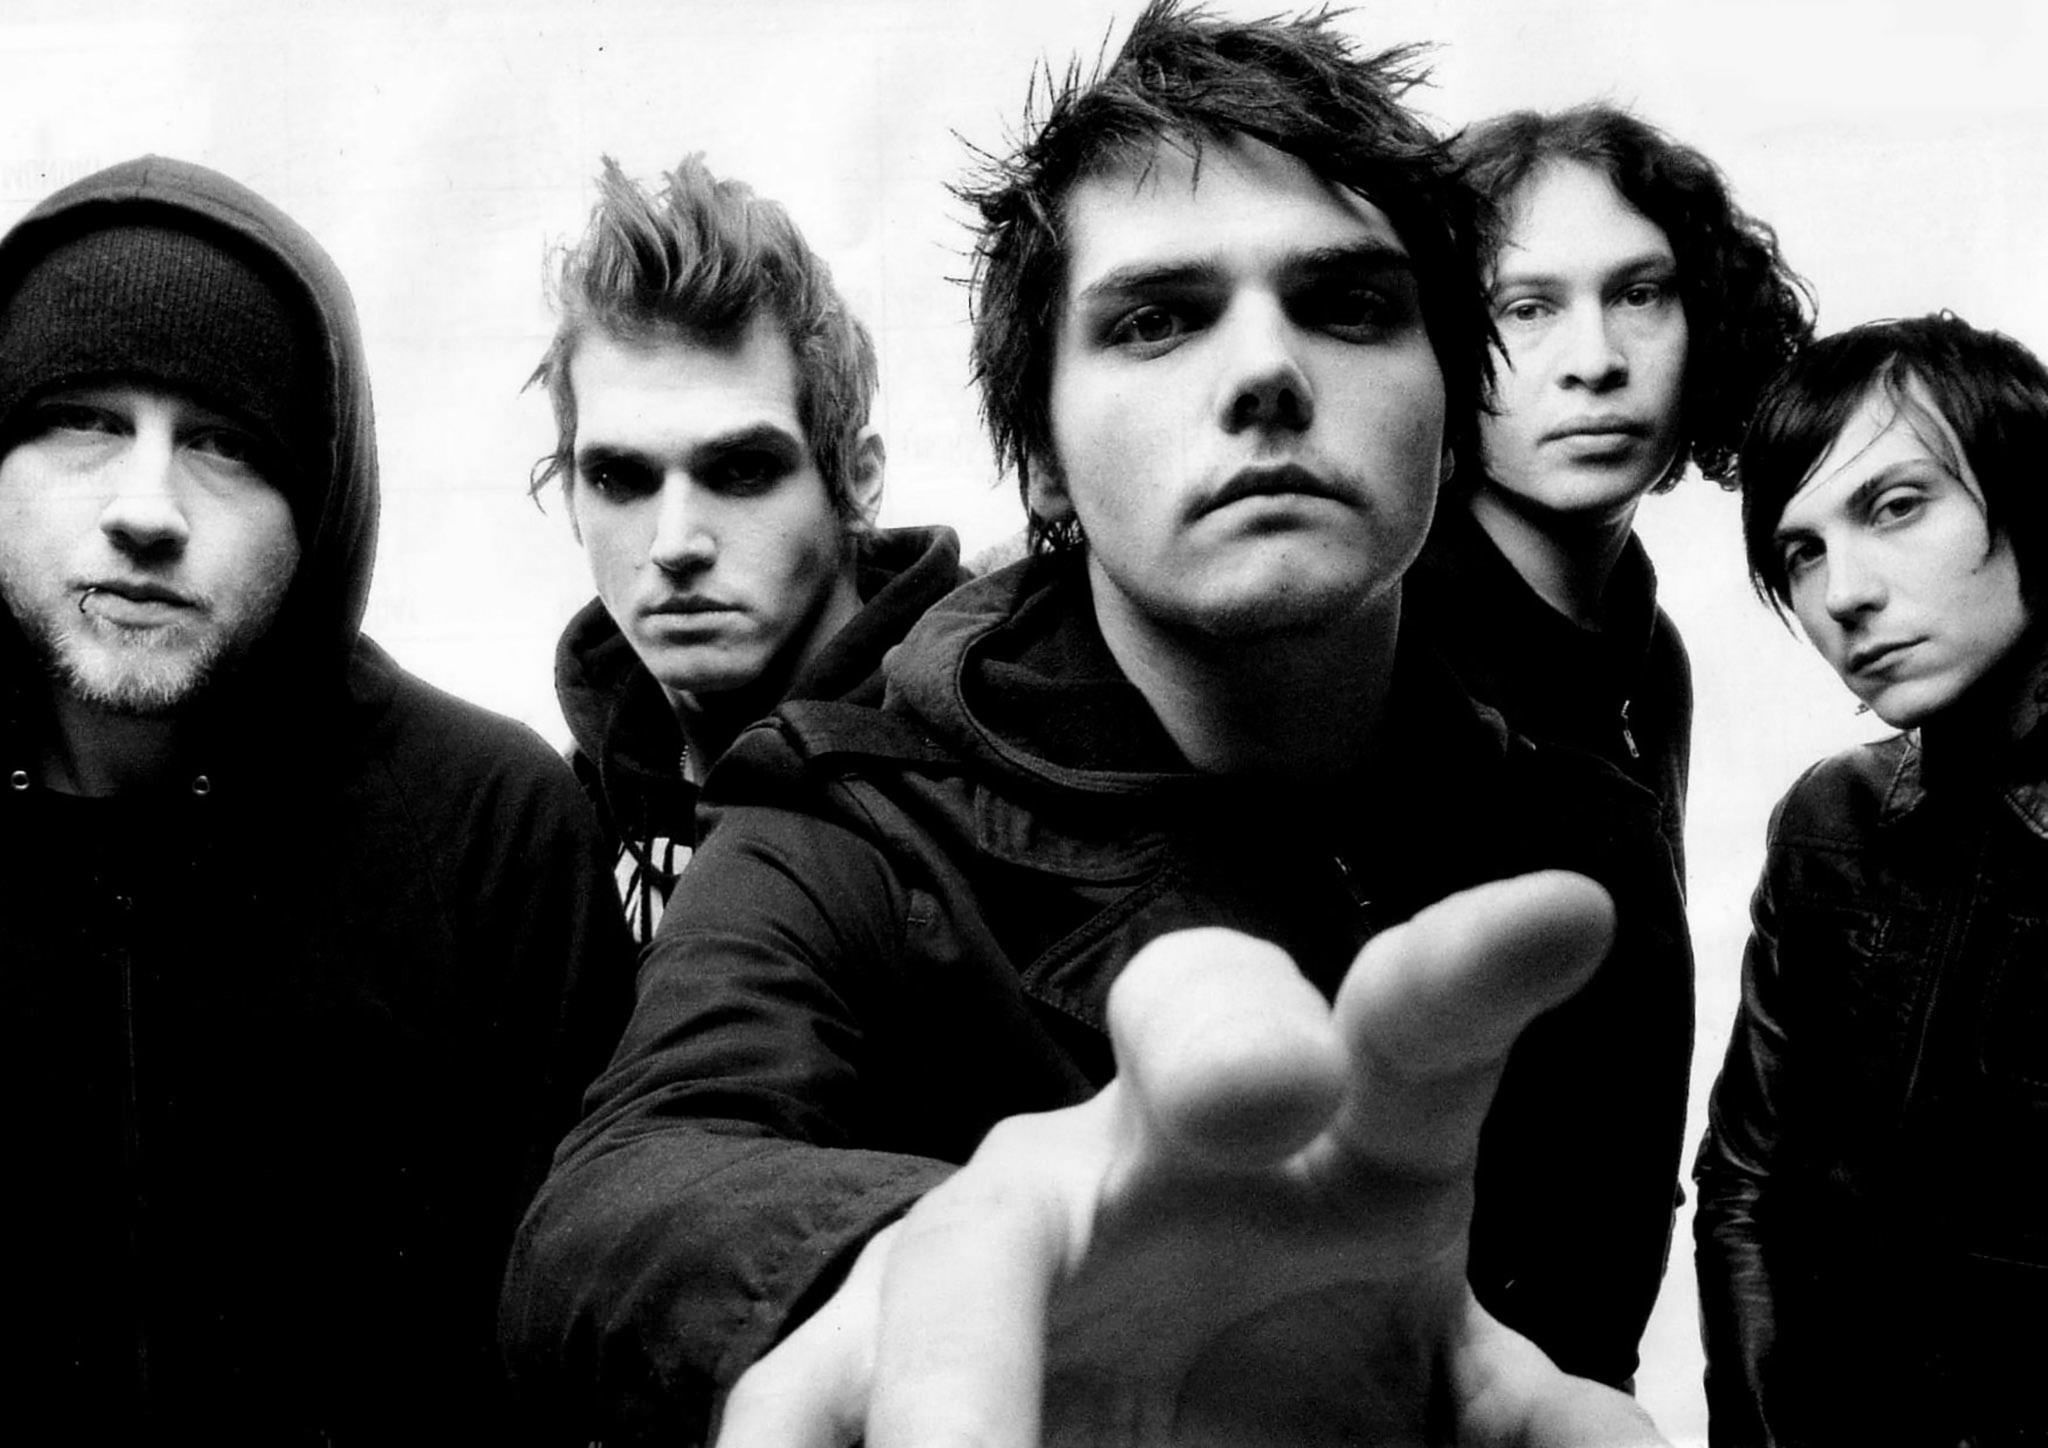 MCR (My Chemical Romance), Top-rated wallpapers, My Chemical Romance backgrounds, Band's iconic imagery, 2050x1450 HD Desktop